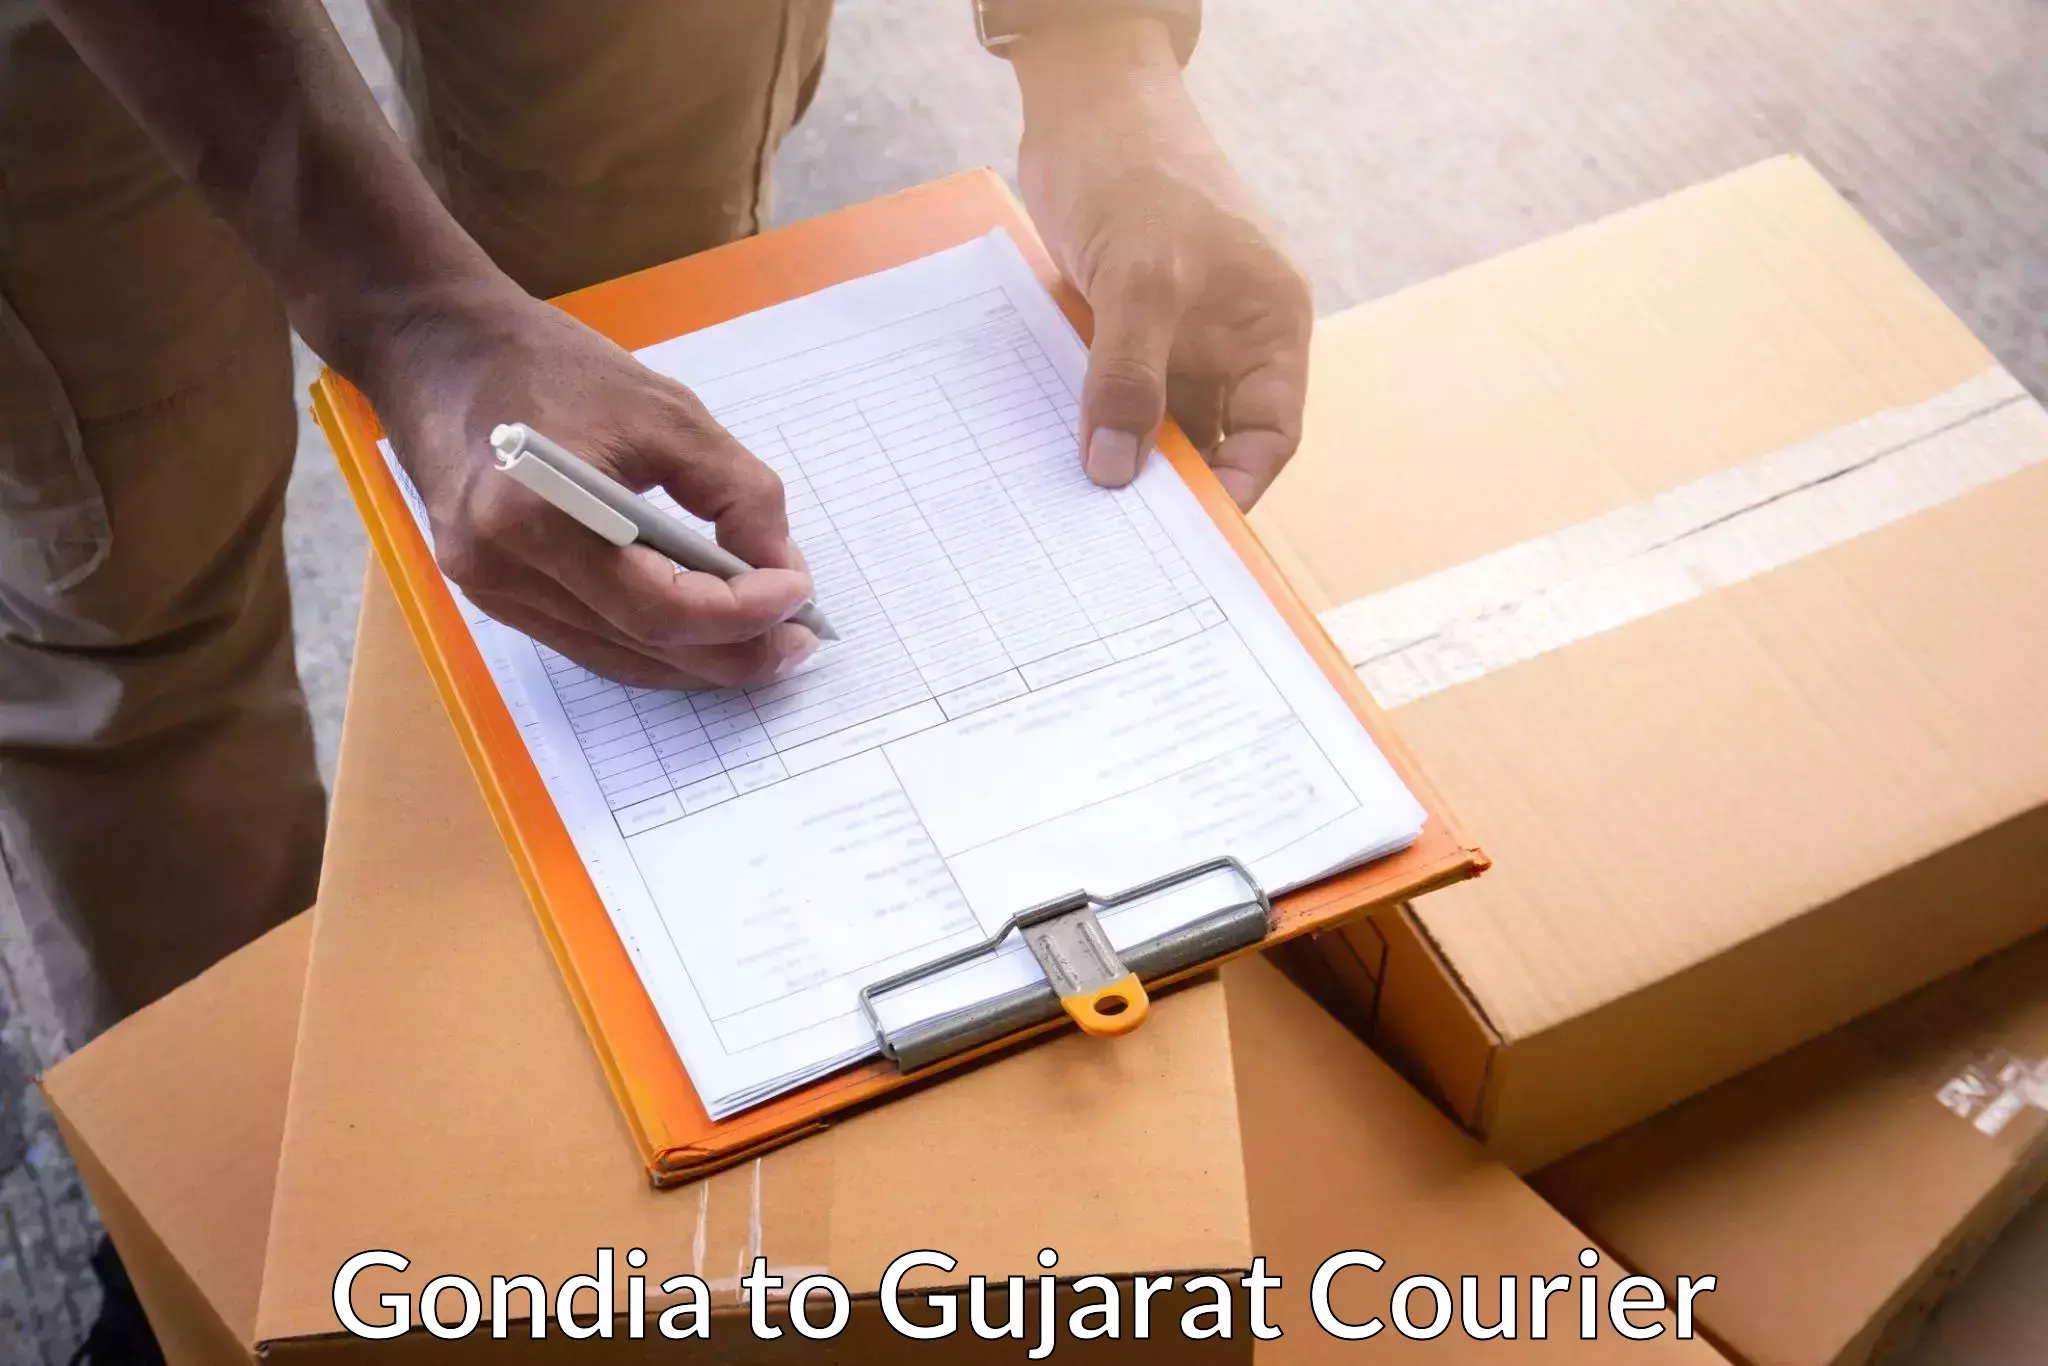 Package delivery network Gondia to Talaja